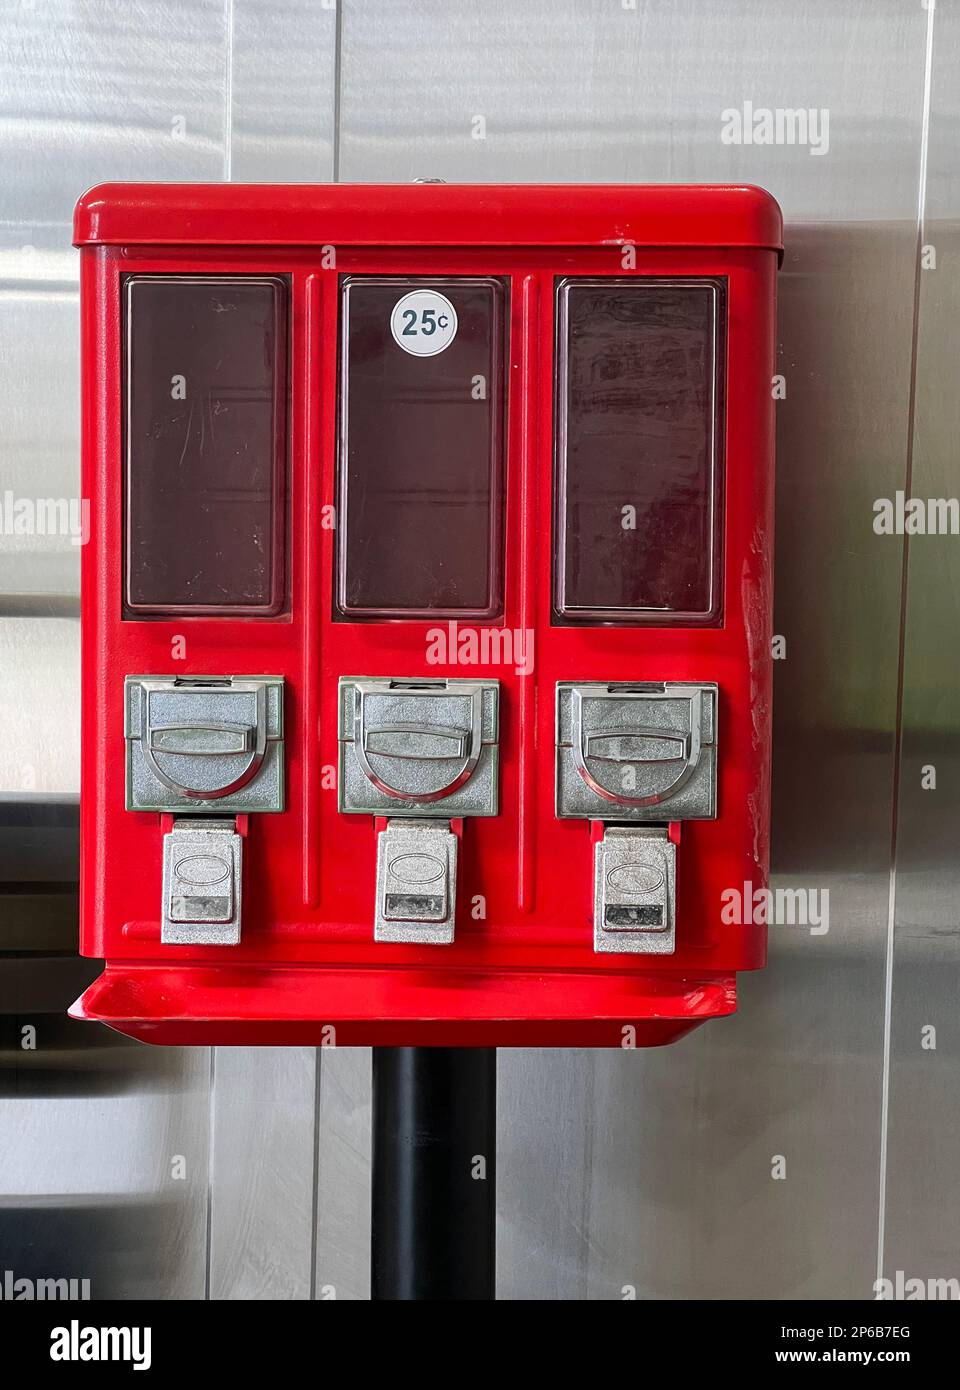 An empty candy dispenser illustrates the concept of supply and demand and inventory management. Stock Photo